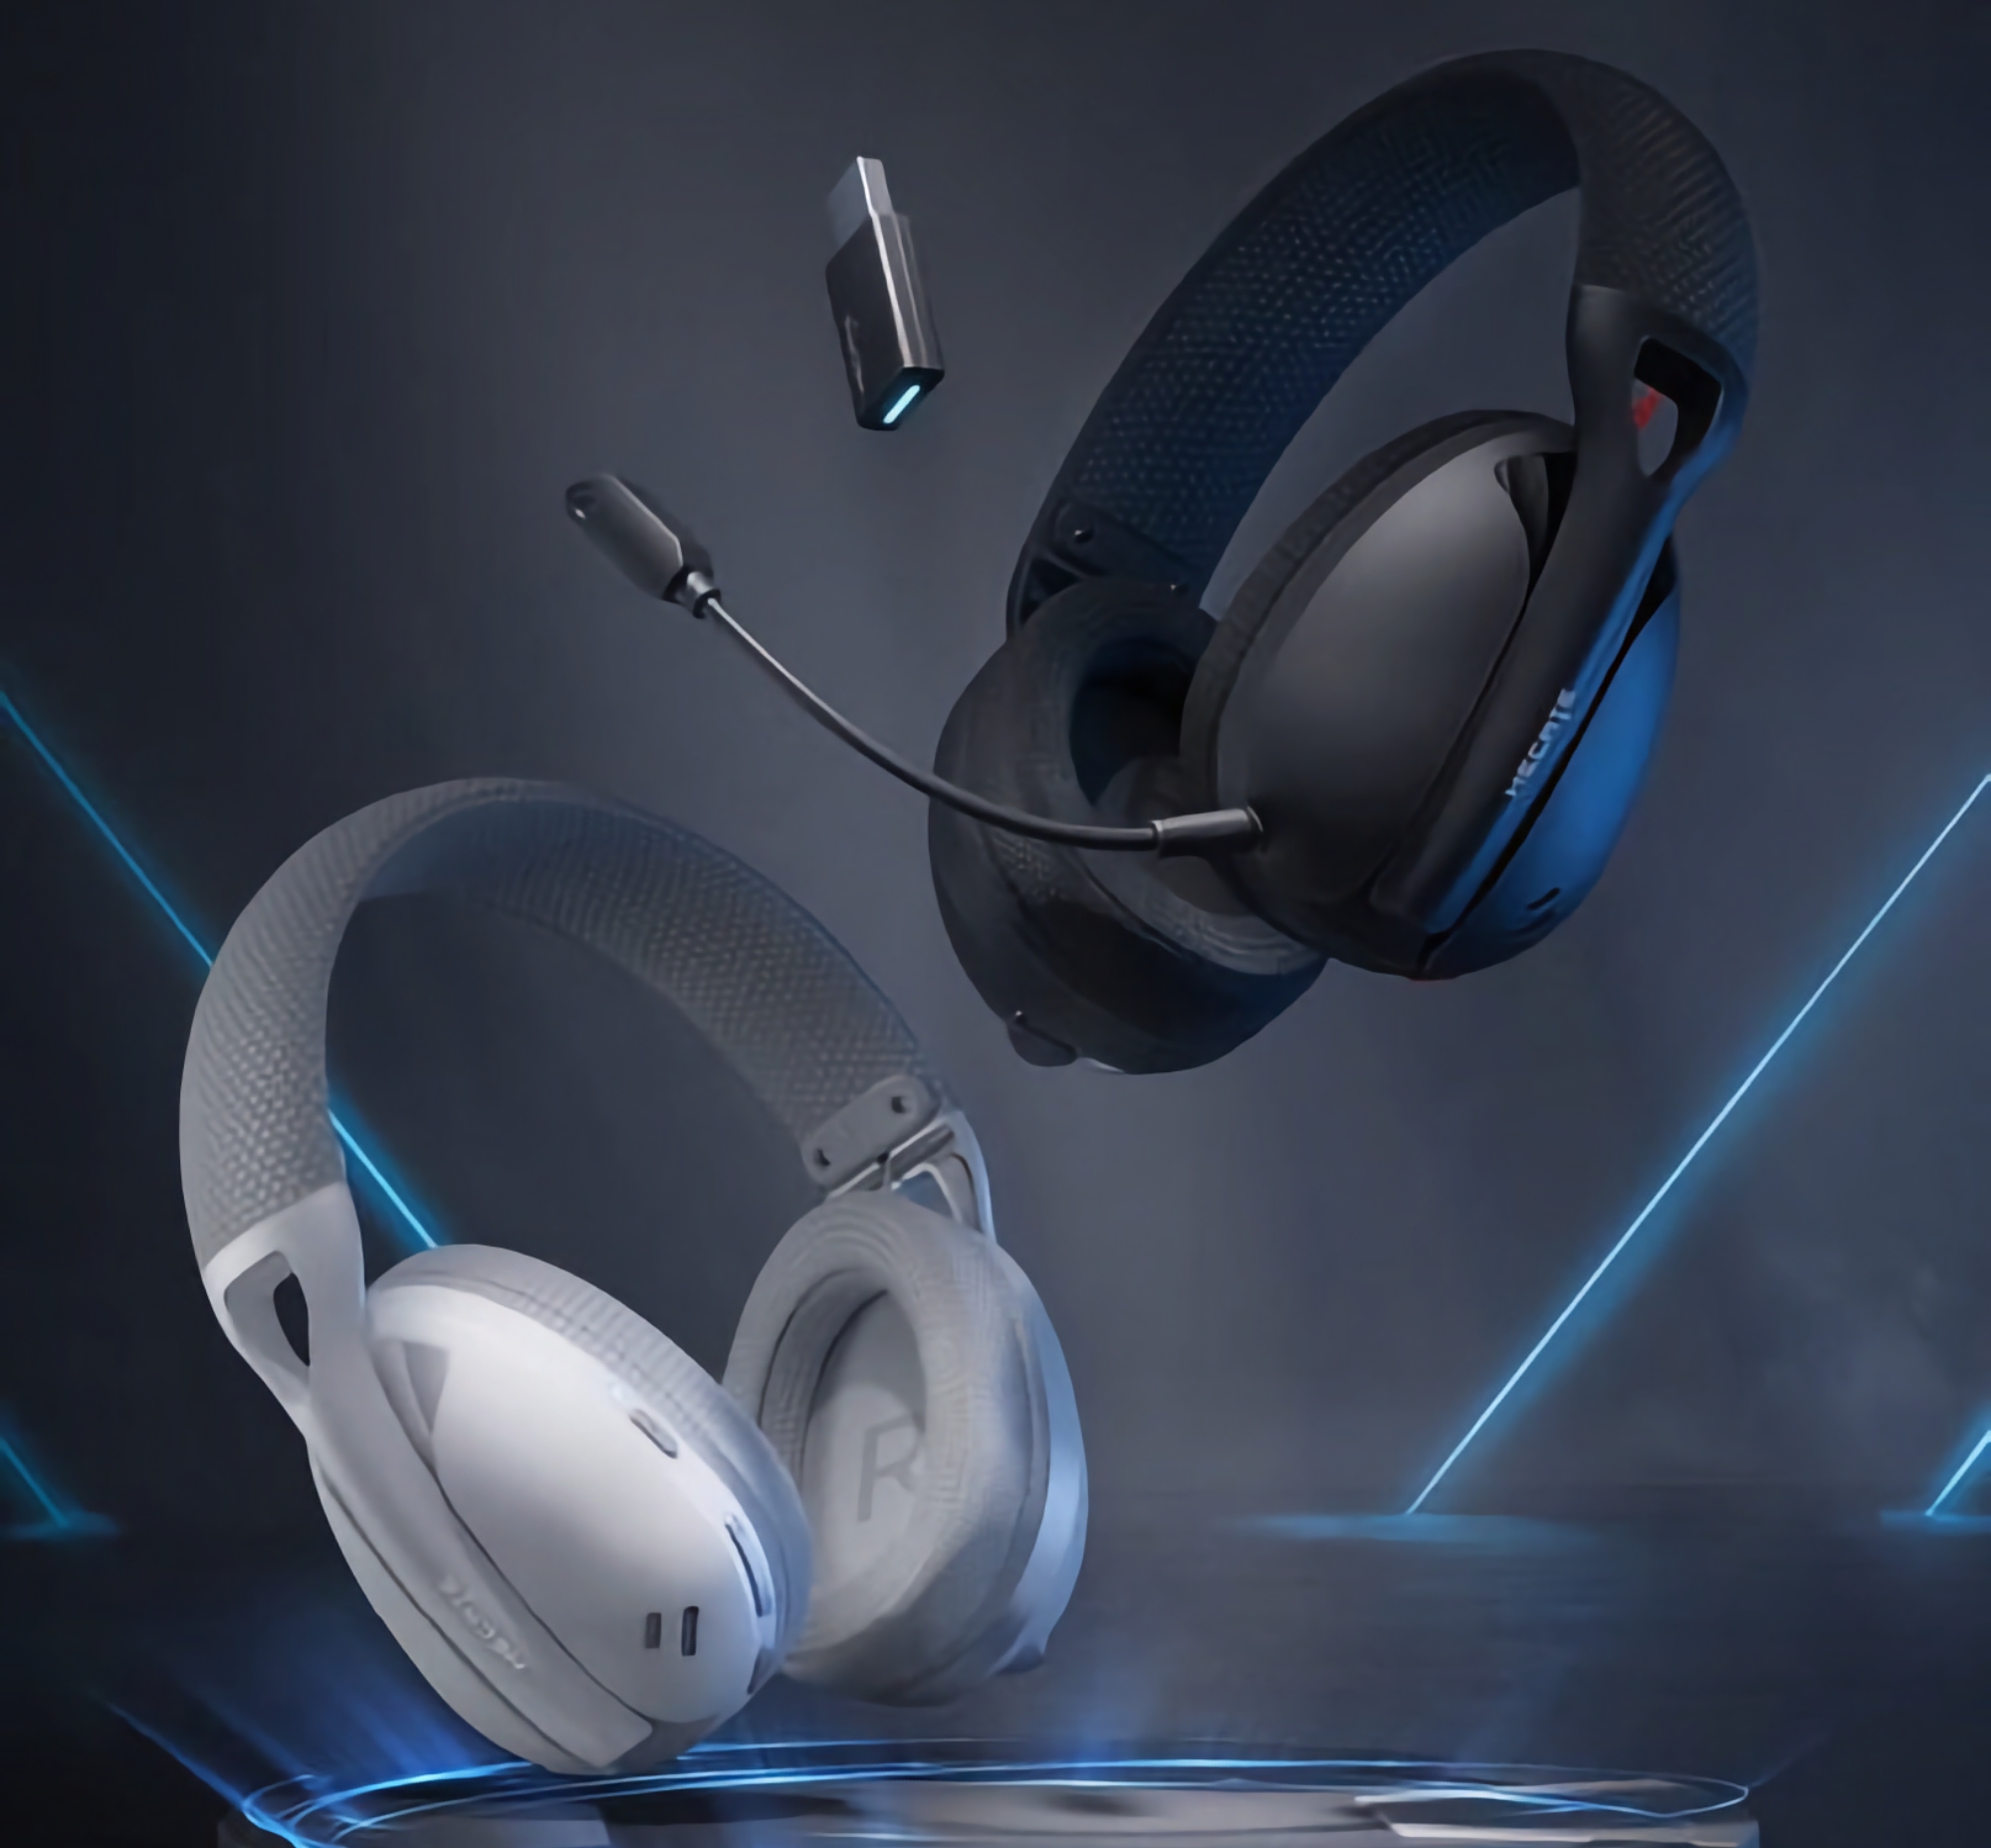 Edifier introduced the HECATE G1S Thunder Edition: low-latency gaming headphones with up to 30 hours of battery life for $13